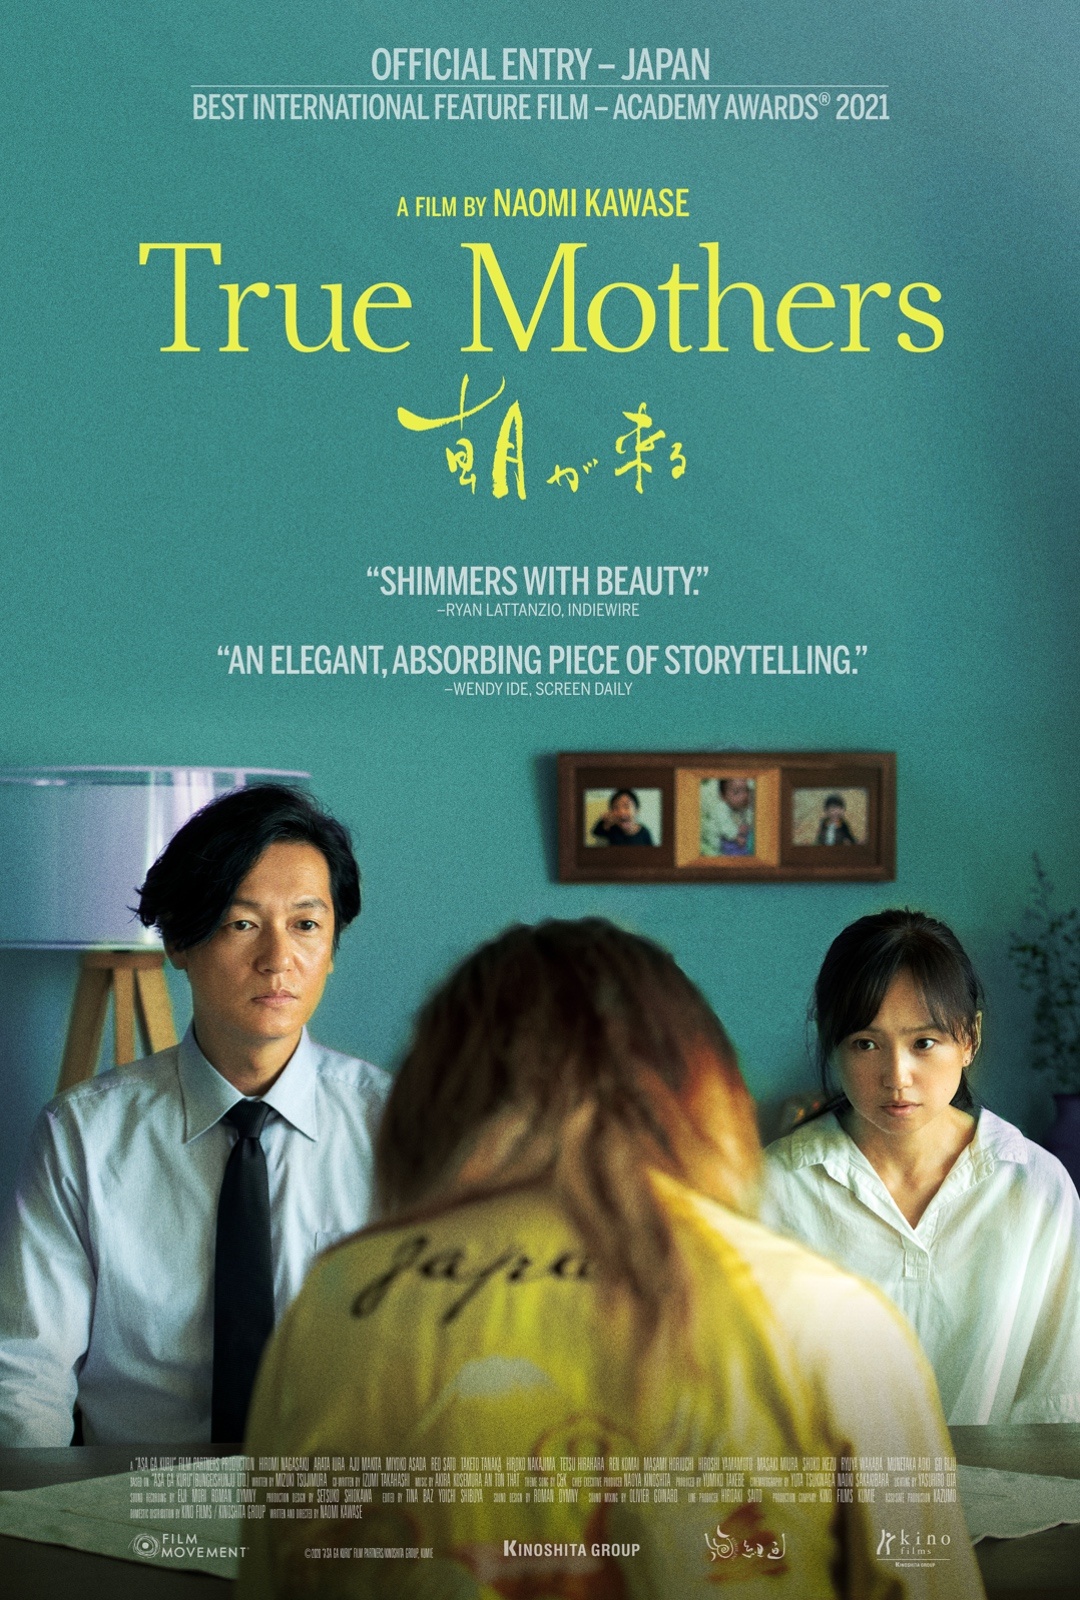 Image of the Movie Poster. Man and woman sitting at a table opposite a young woman in a yellow correctional facility uniform. The girl has her back turned to us and is facing the man and woman. Her head is slumped forward.